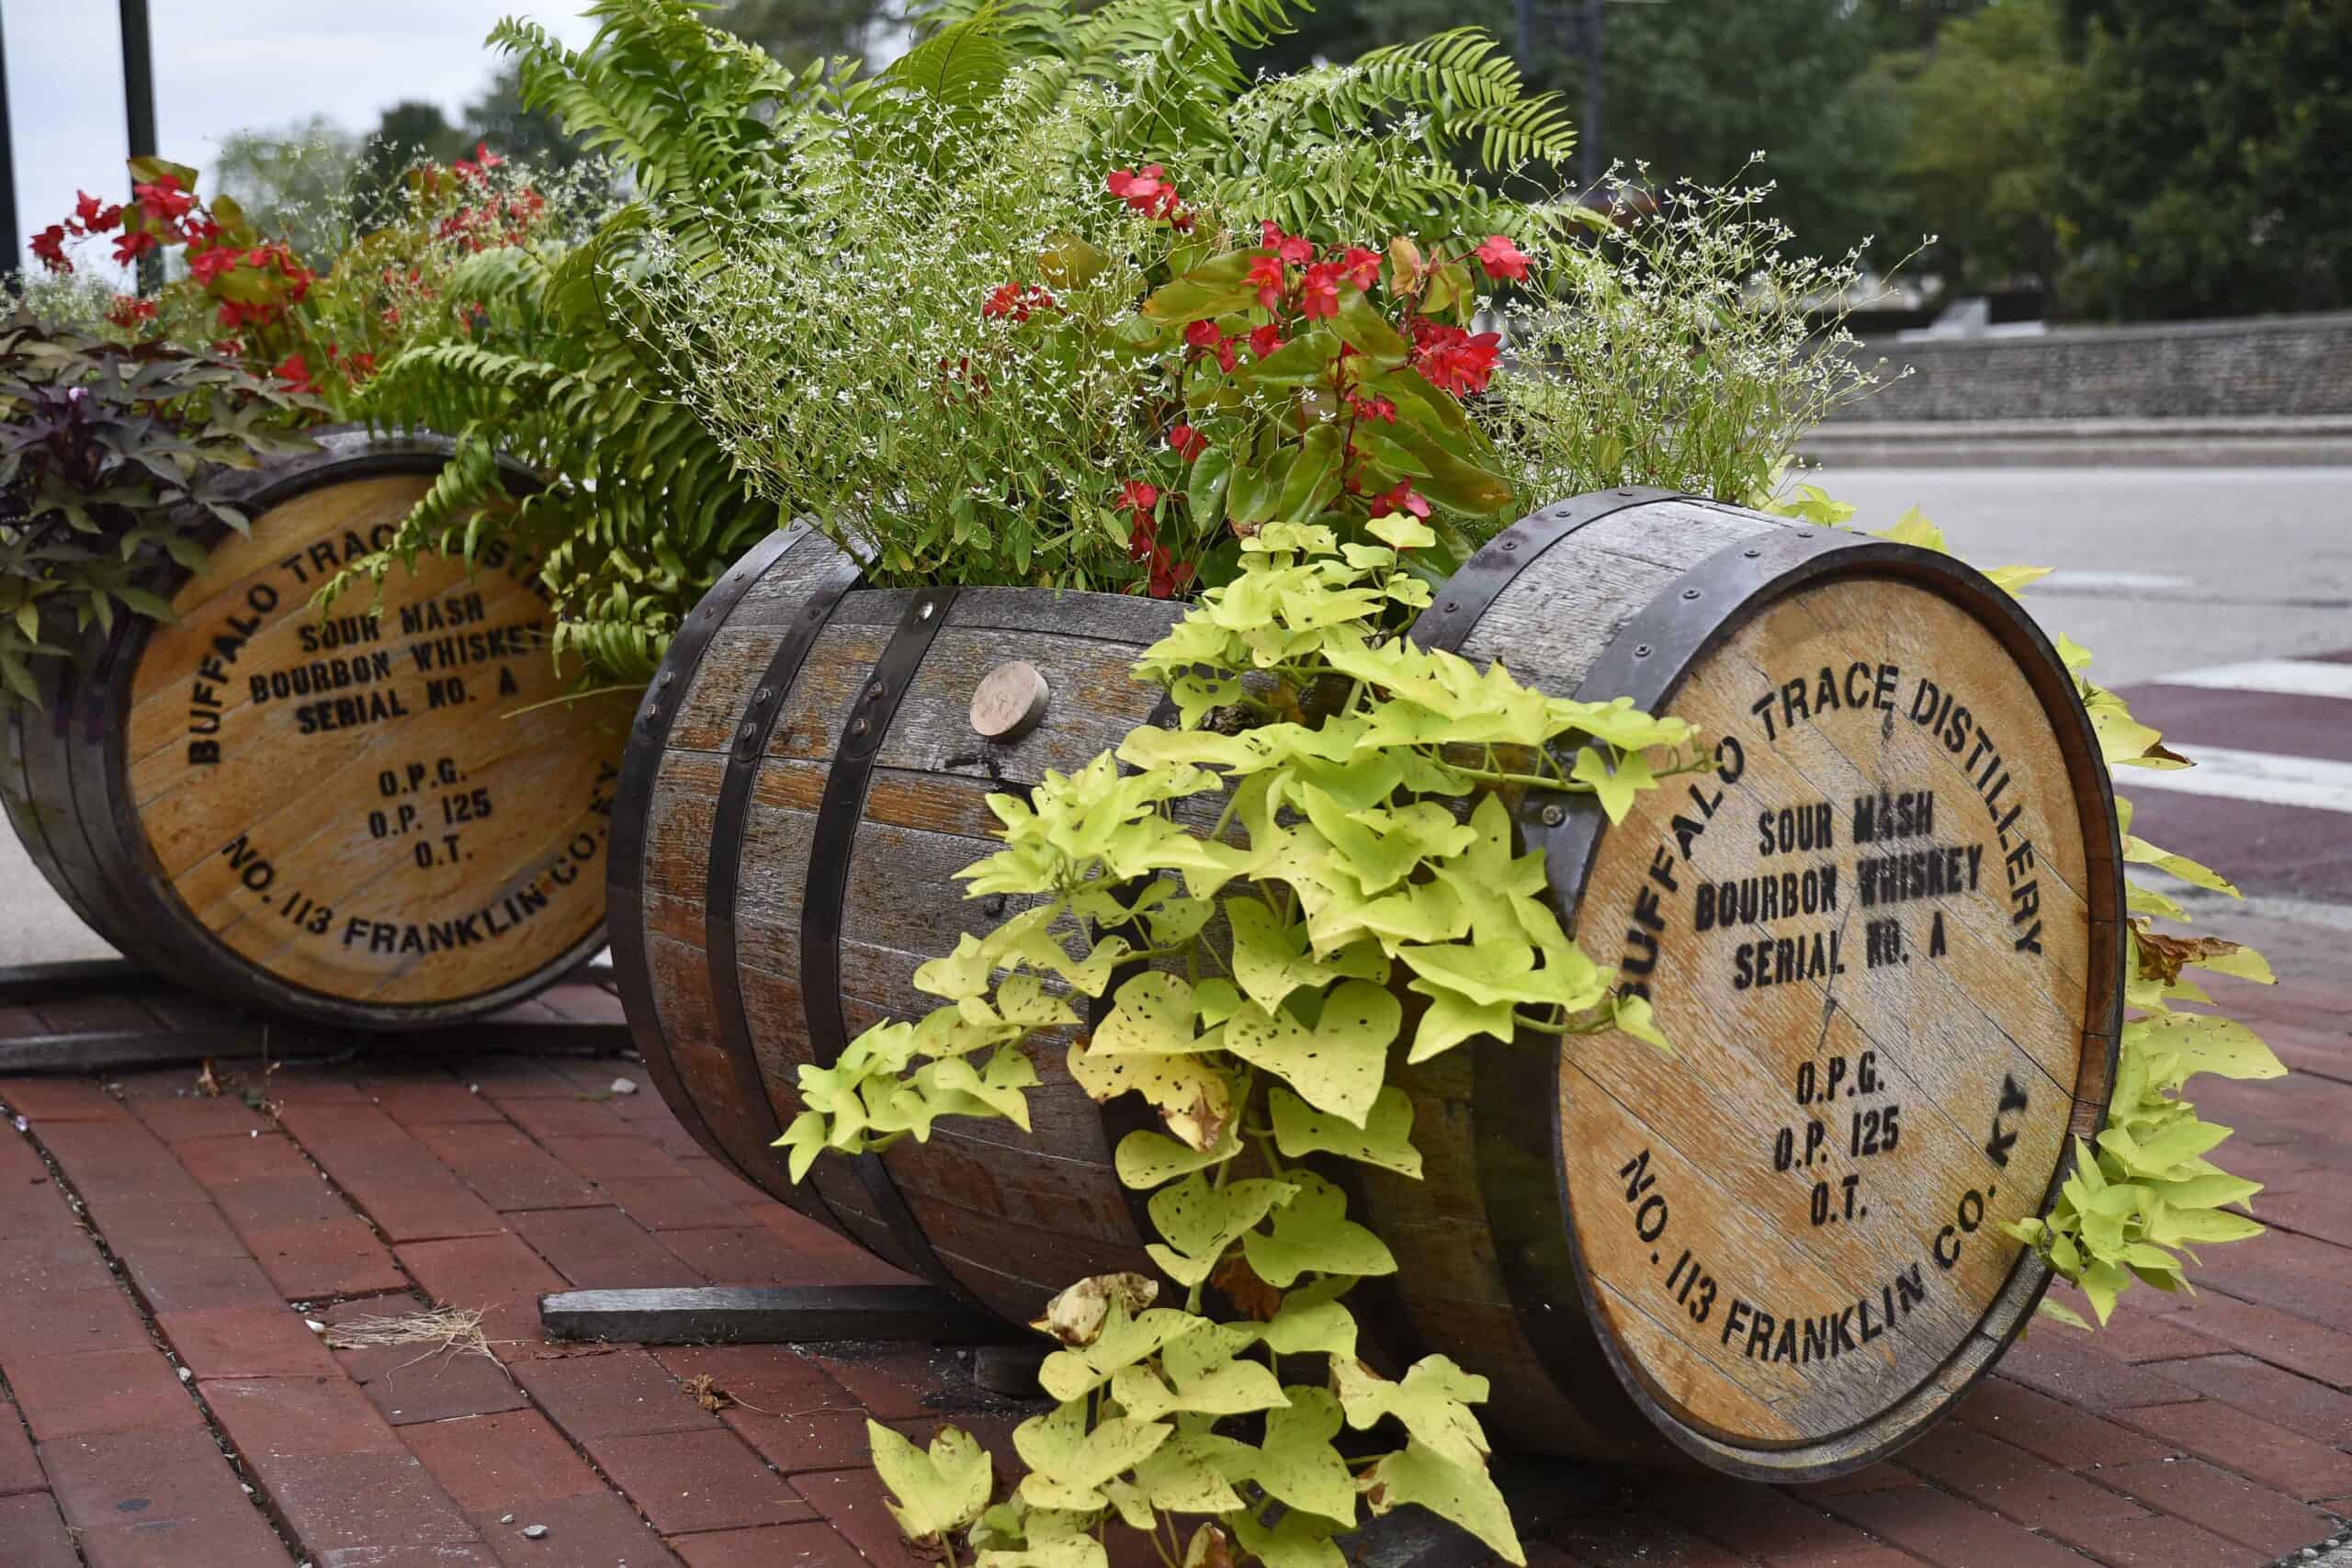 The barrels from Buffalo Trace are the perfect decorations for downtown Frankfort, Kentucky.